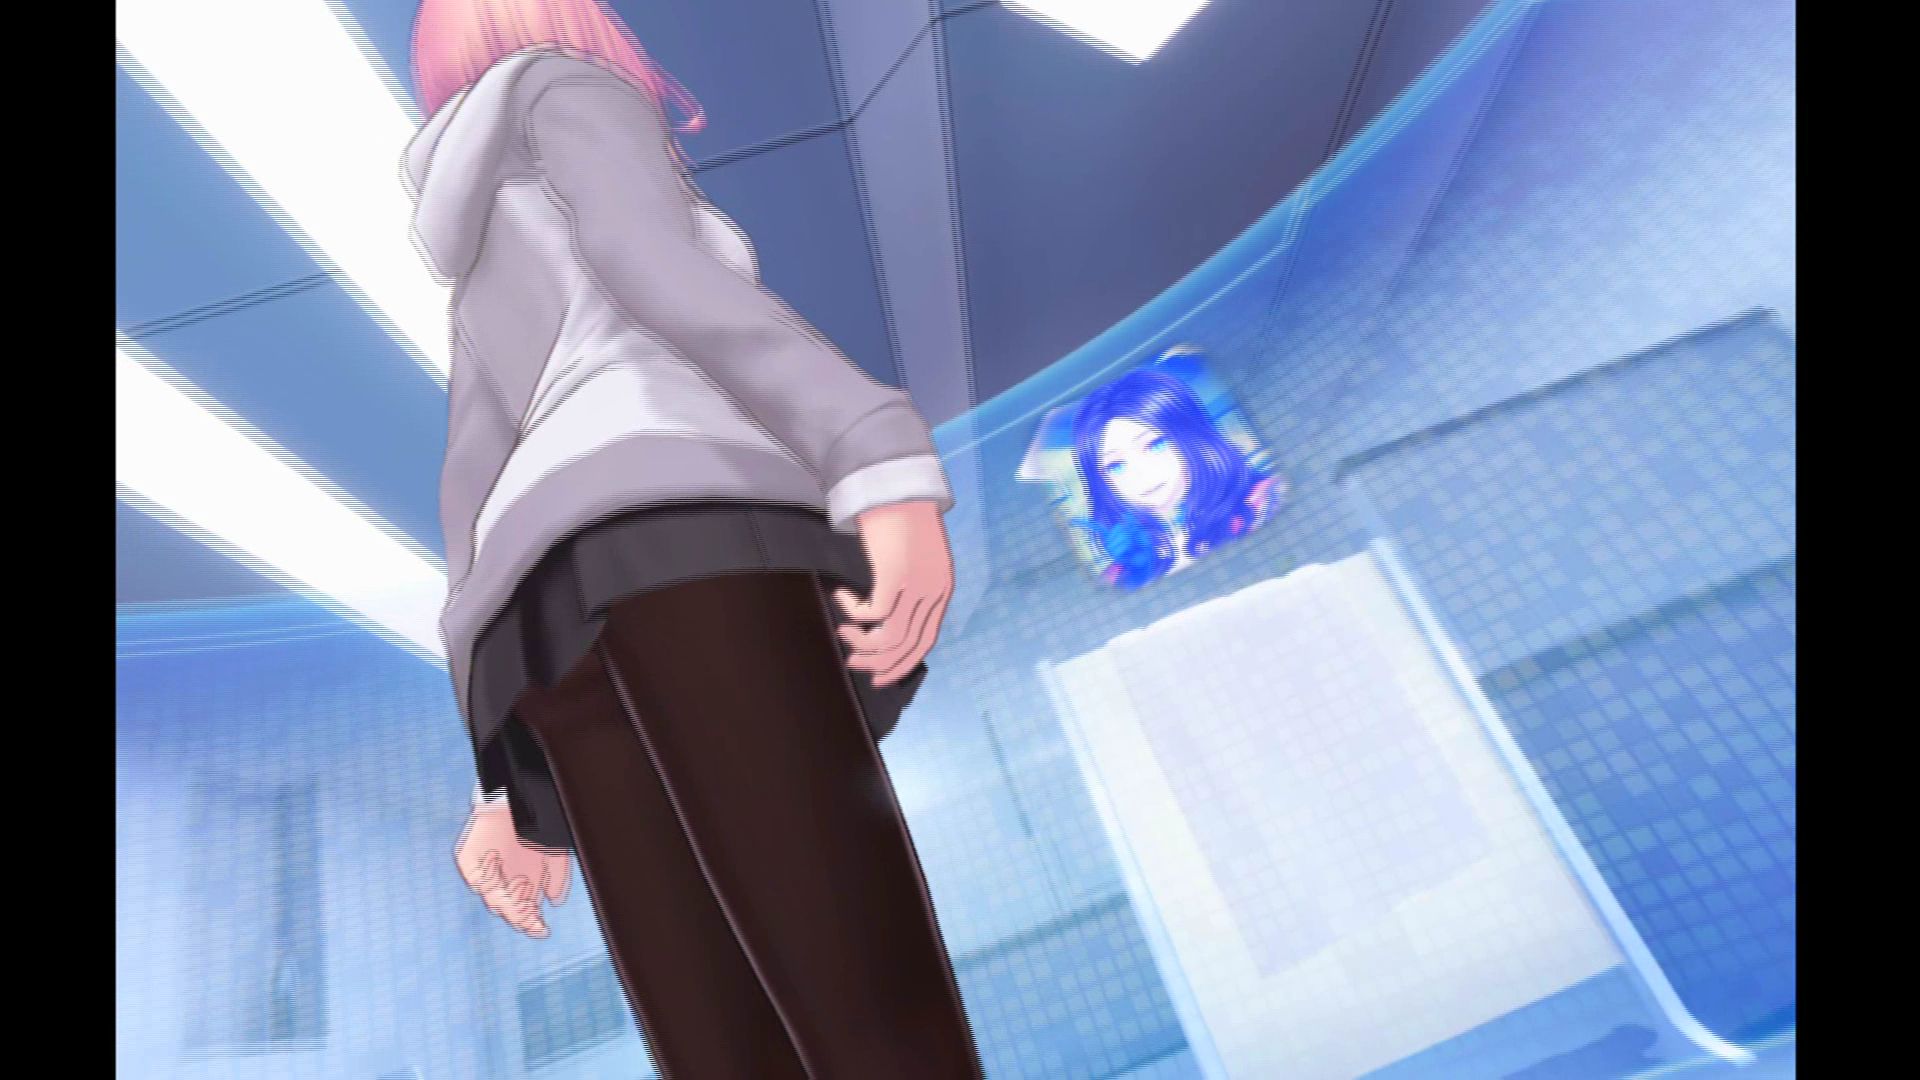 [Fate/Grand order VR] Maschsee underwear and breast! The underwear of the alto rear, too! 3